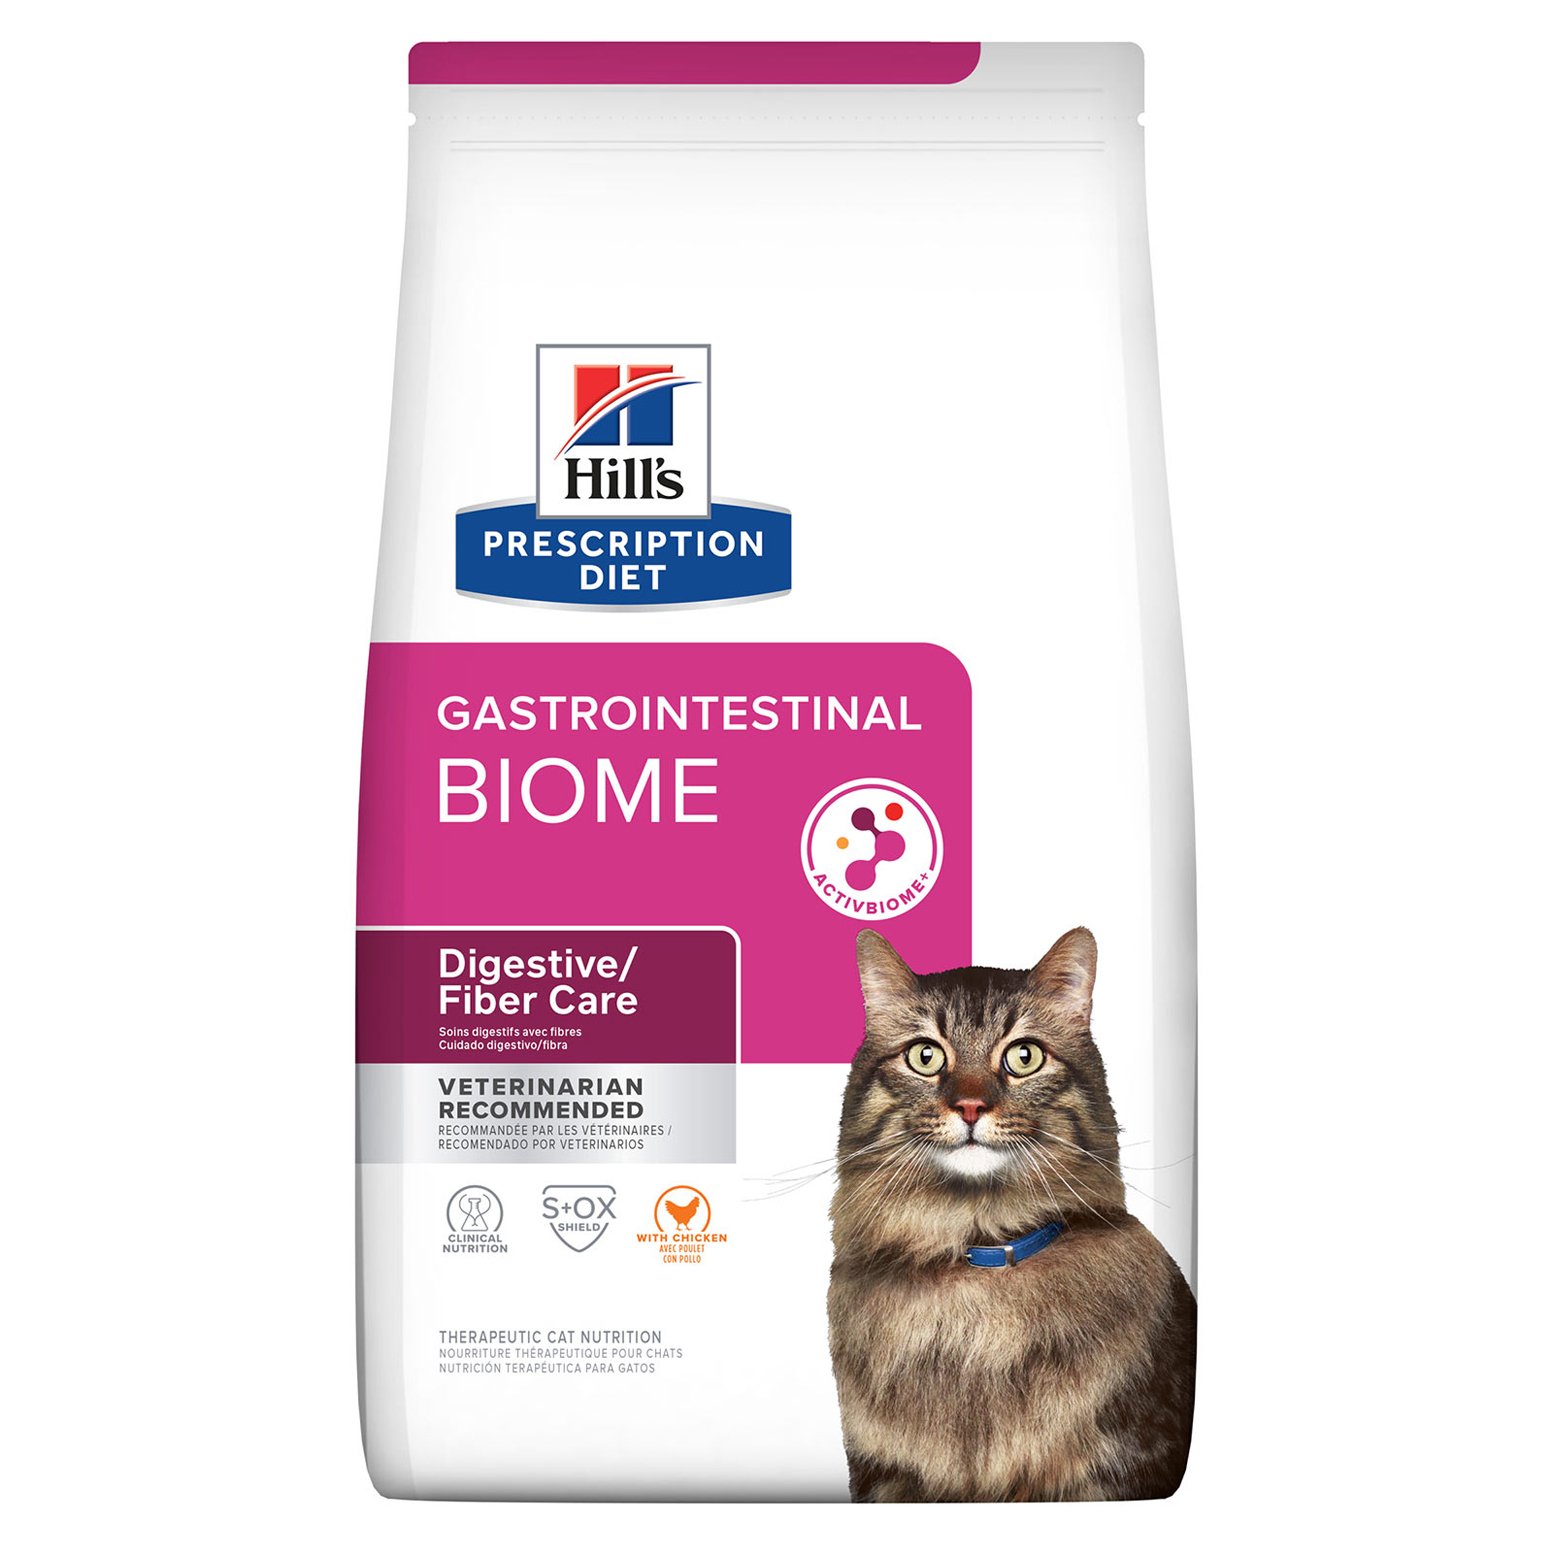 Hill's Prescription Diet Gastrointestinal Biome Digestive Fiber Care with Chicken Dry Cat Food